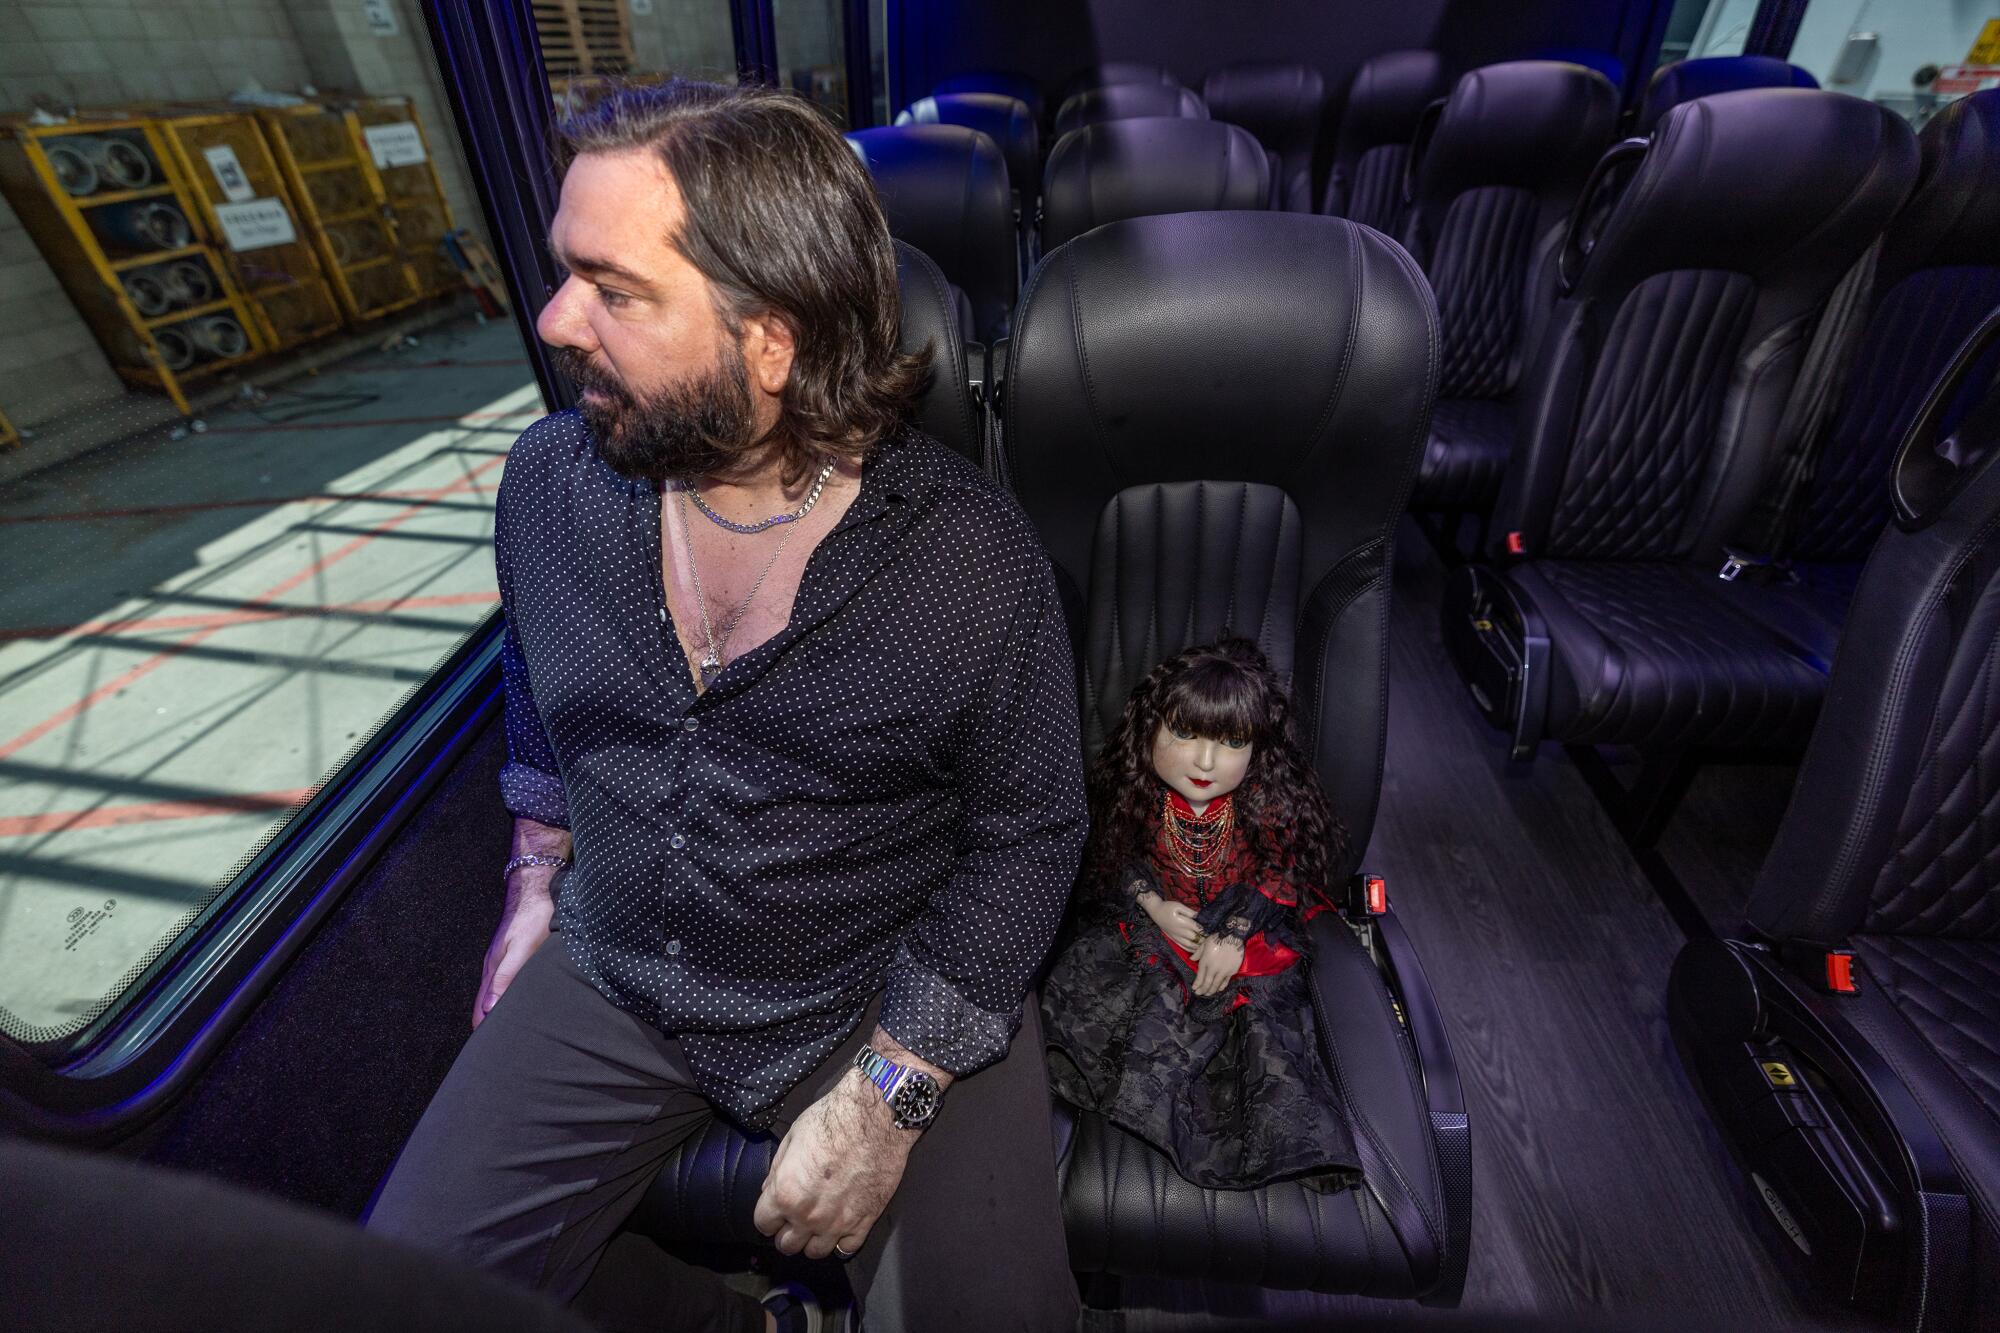 A man shares a bus seat with a small doll prop